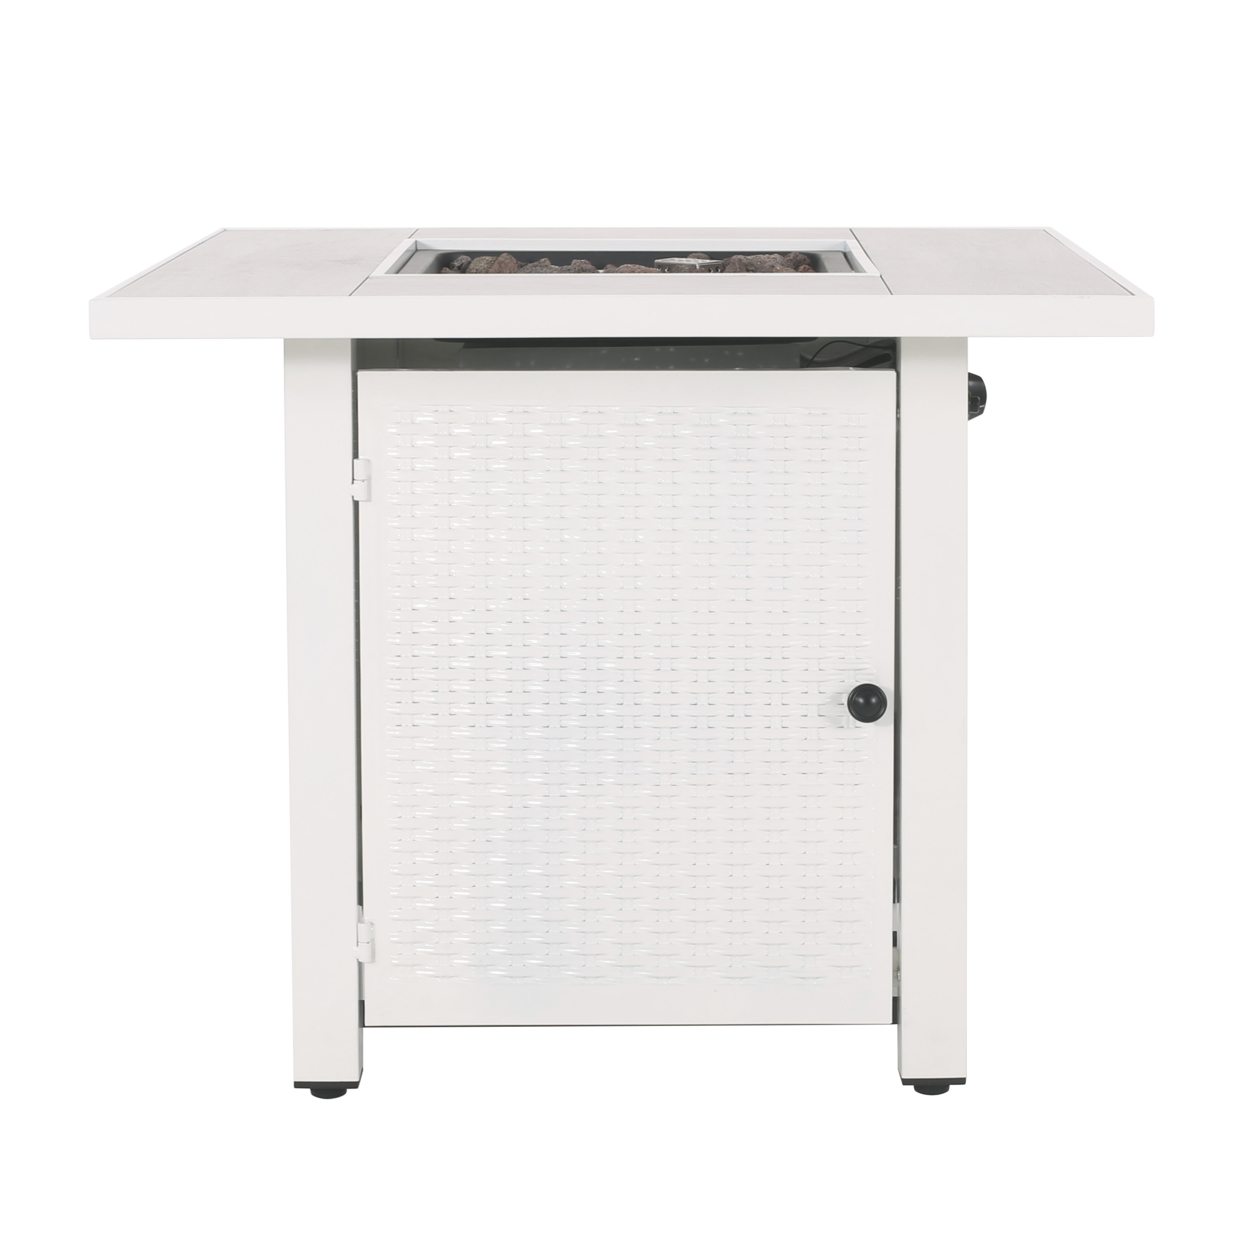 Larry Outdoor 40,000 BTU Iron Square Fire Pit - White/light Gray